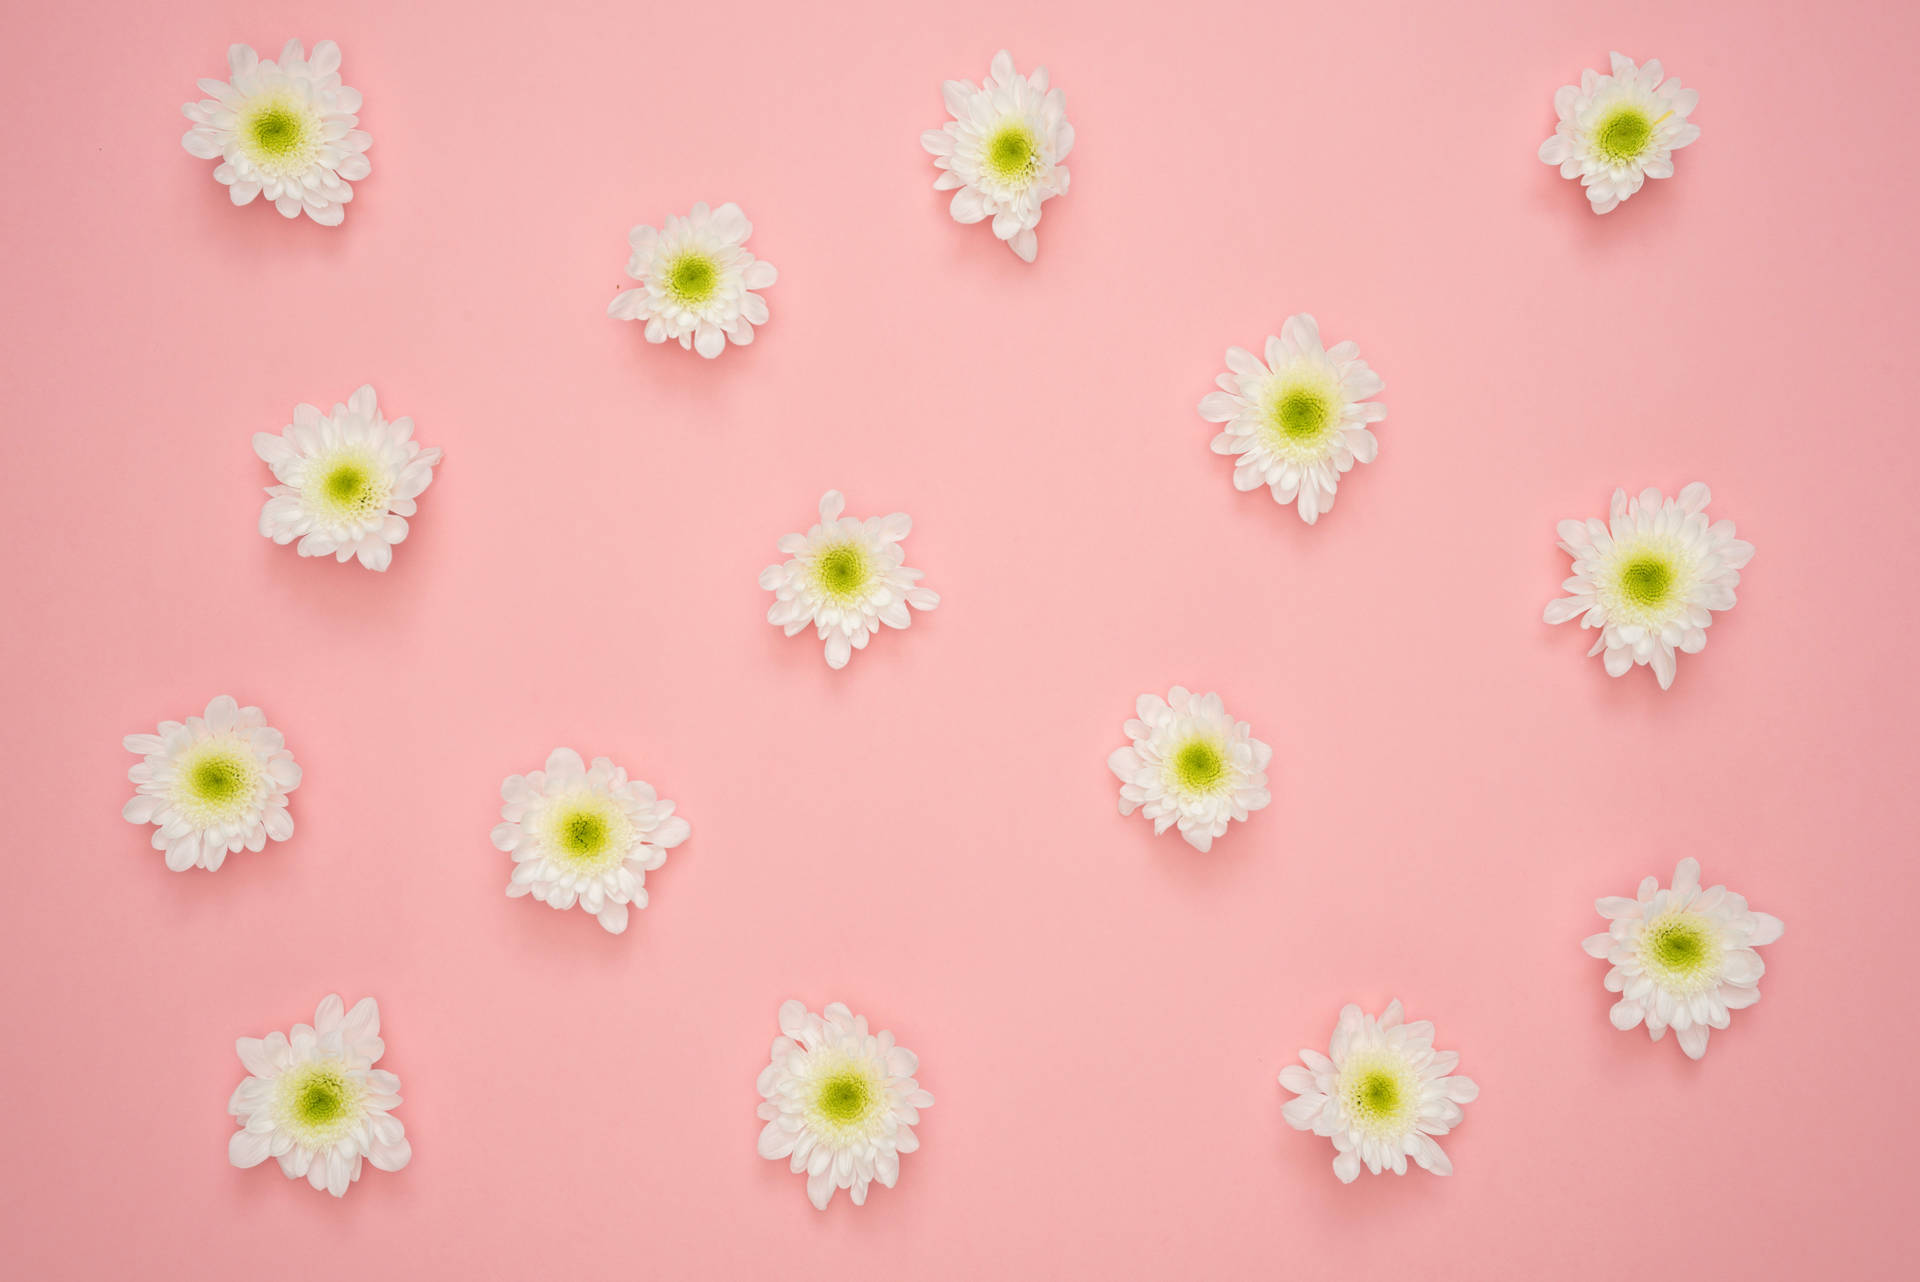 Caption: Blossoming White Flowers on Pink Background. Wallpaper